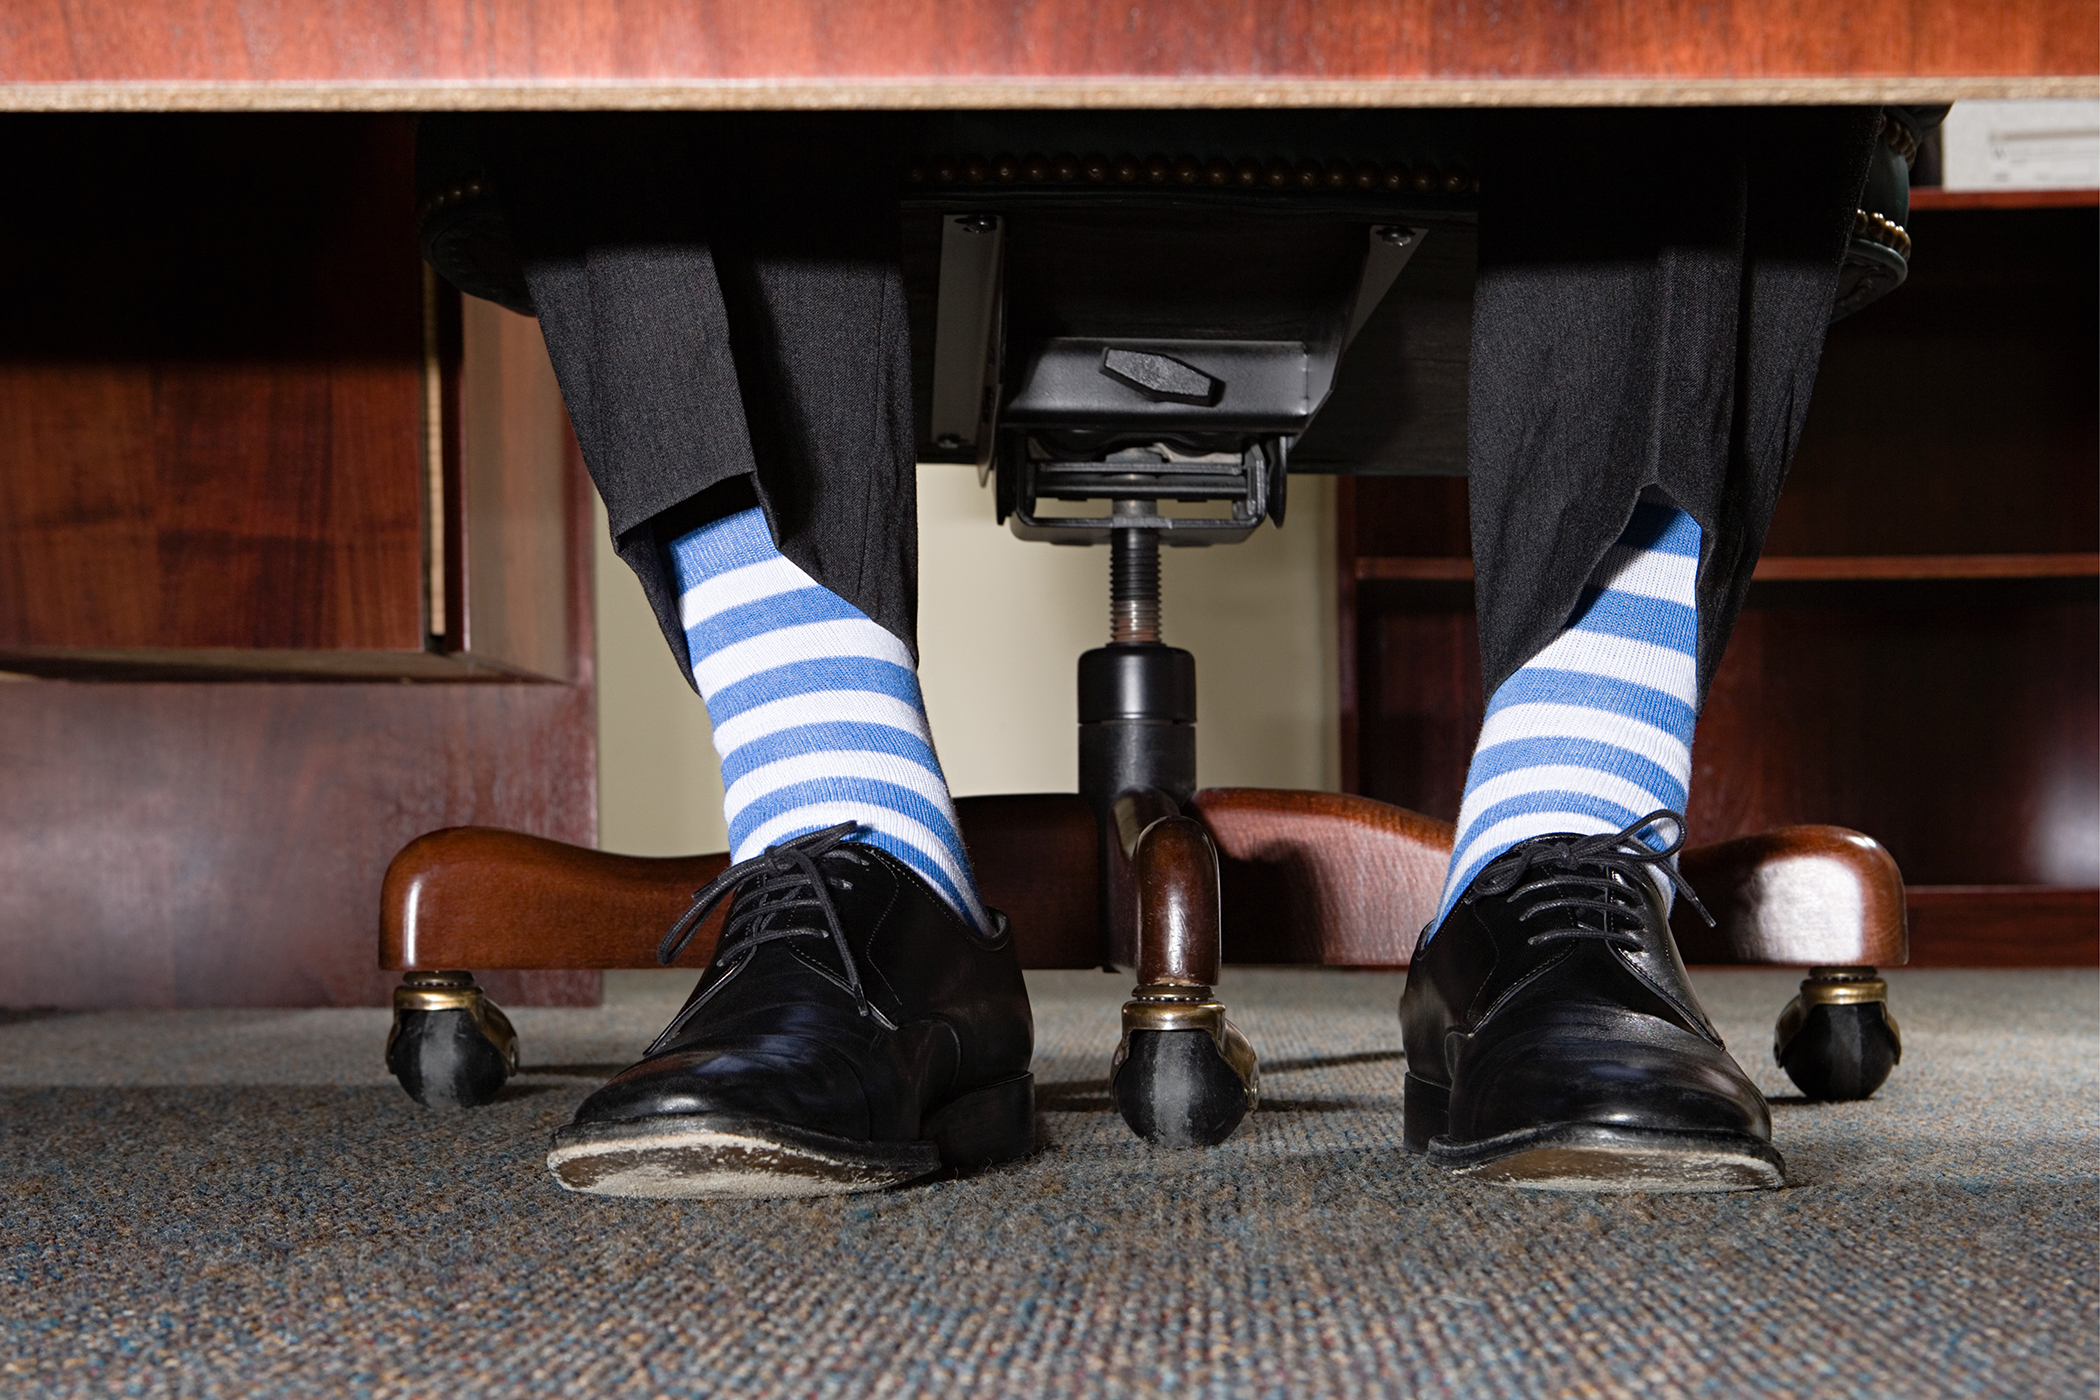 Wardrobe Mistakes That Will Blow a Job Interview